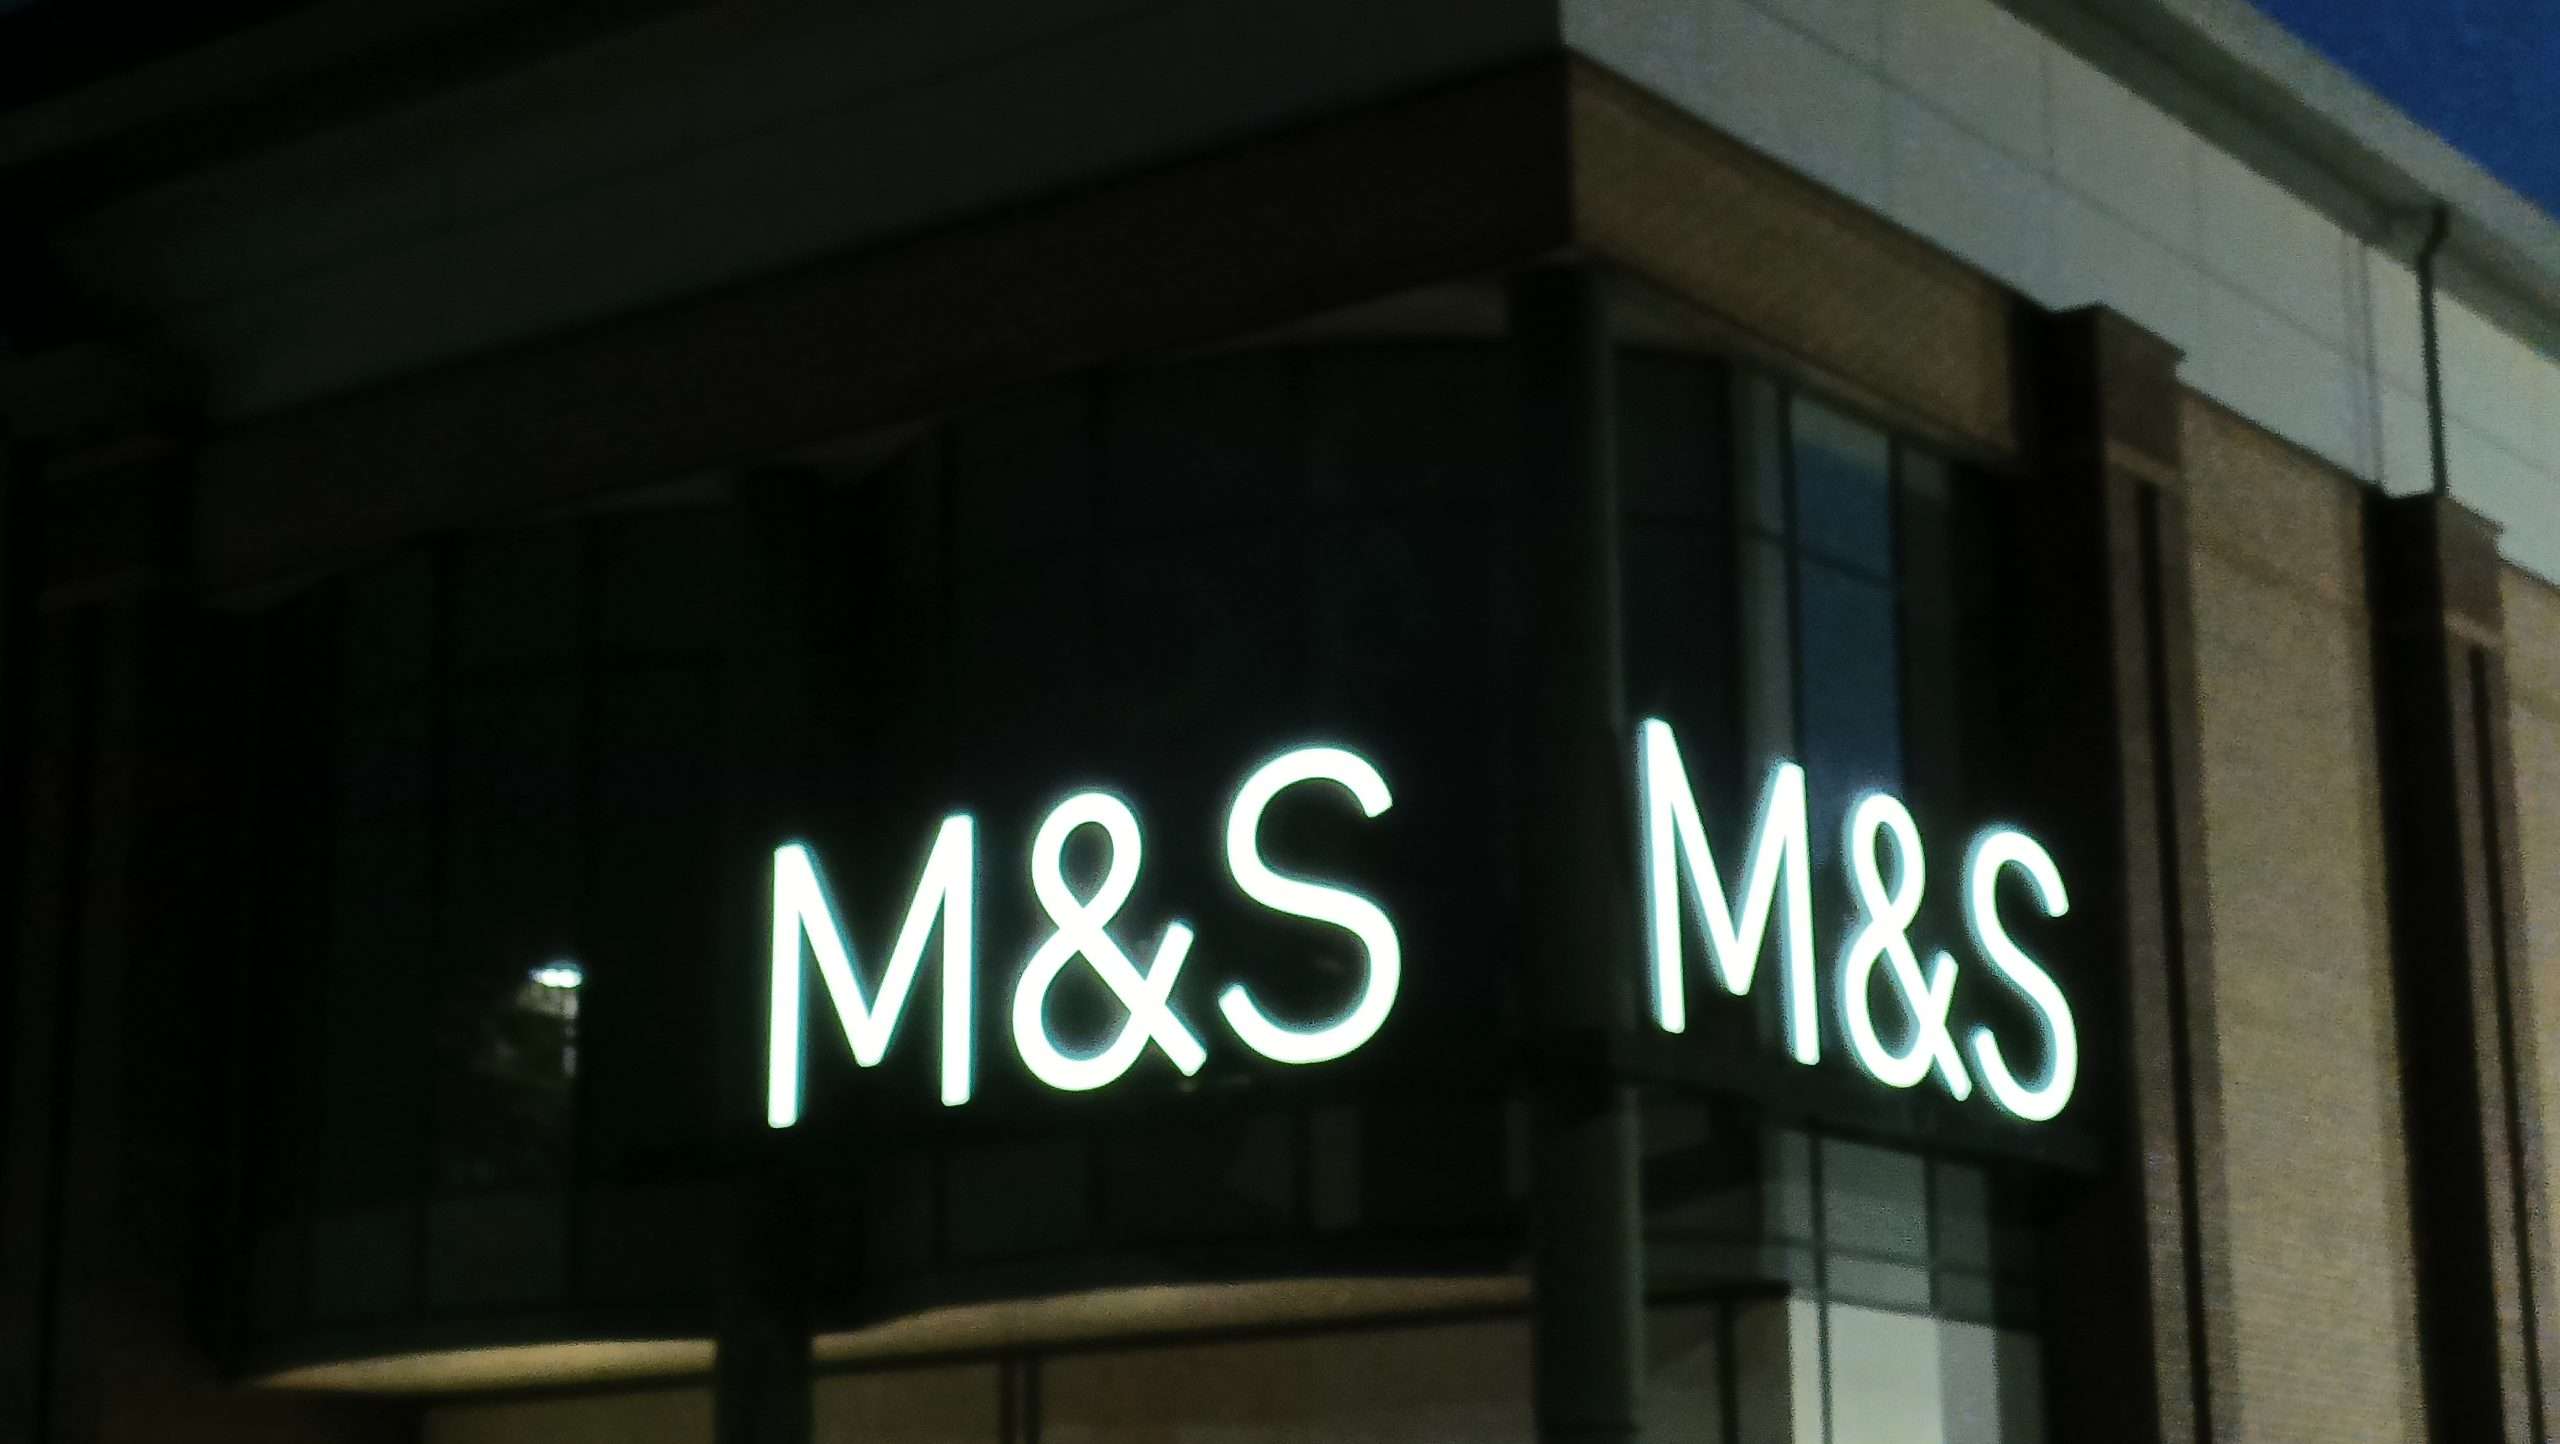 “Town killing” proposal to close M&S in Neath needs answers says Plaid MS